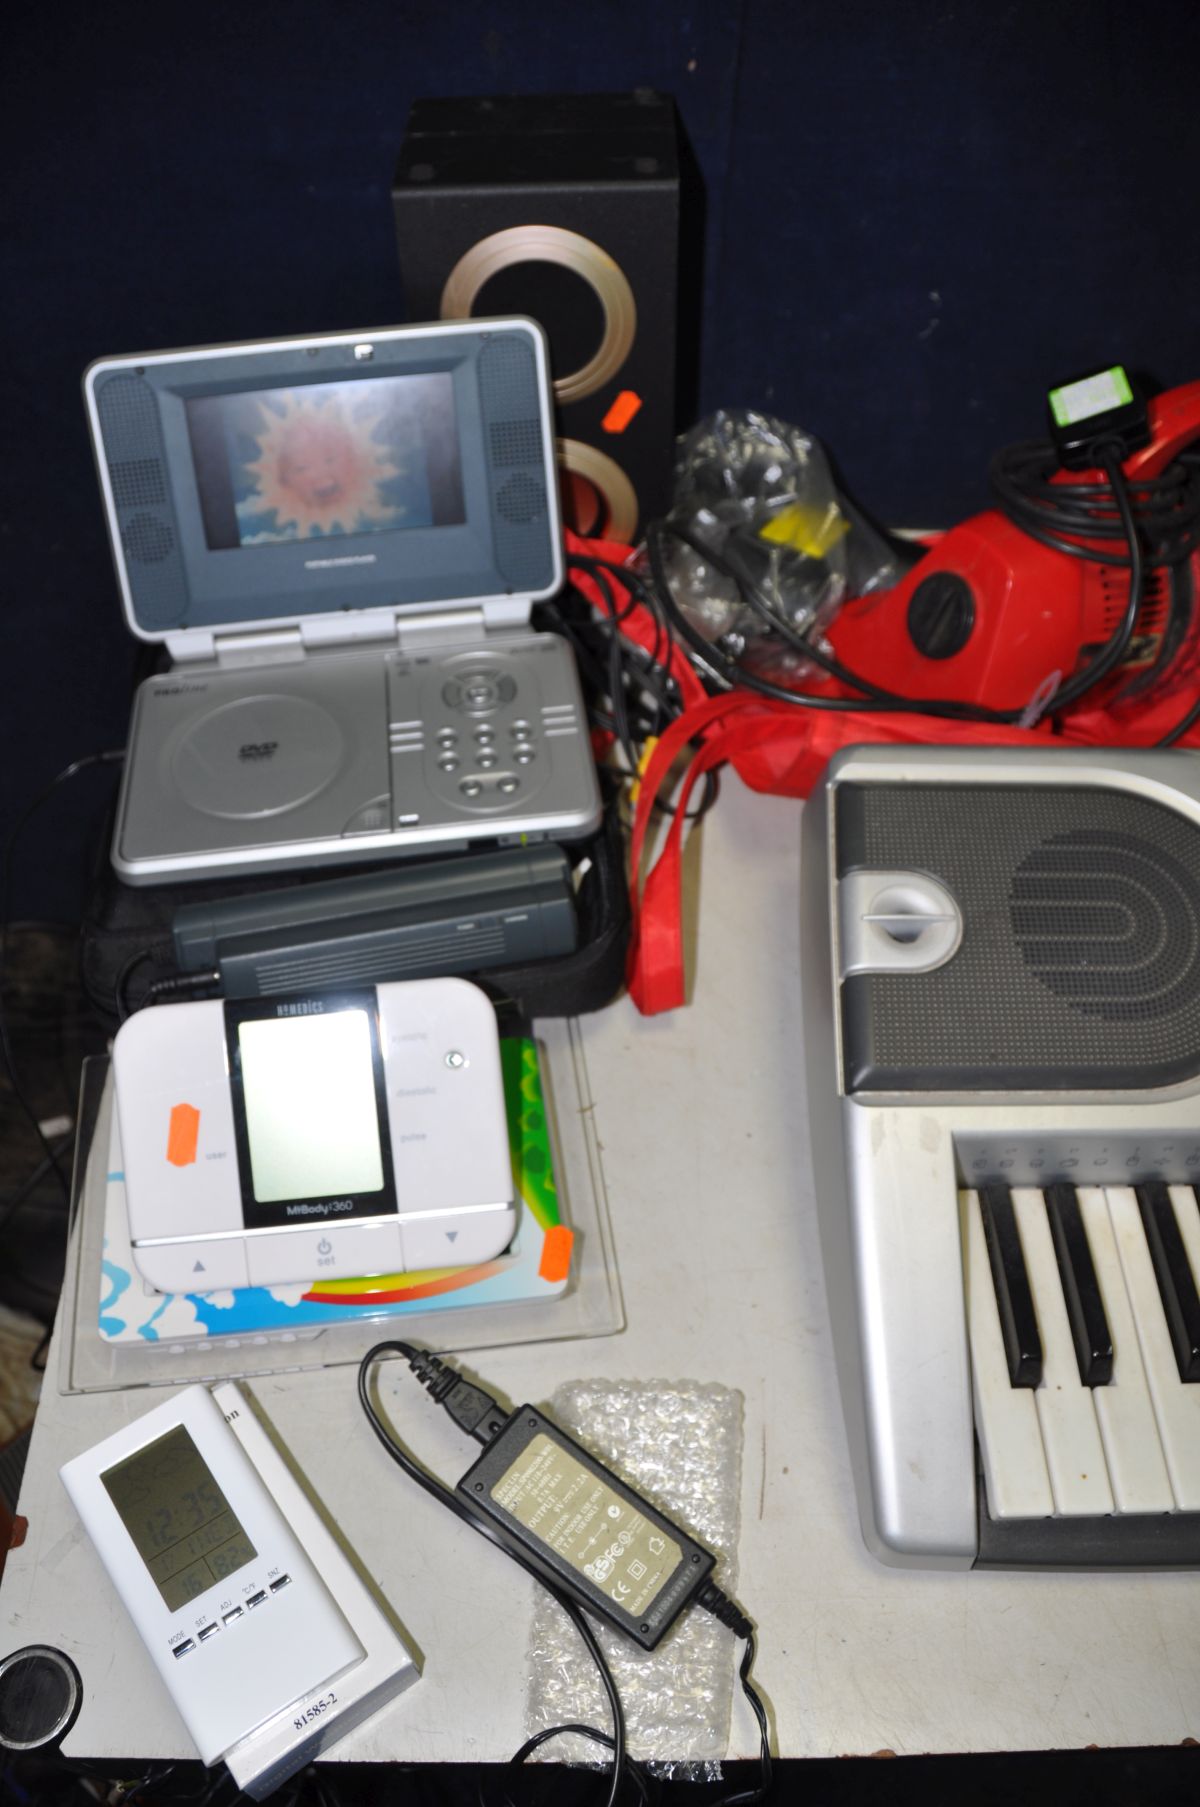 A COLLECTION OF HOUSEHOLD ELECTRICALS including a Proline portable DVD player, a Dirt Devil handheld - Image 2 of 5